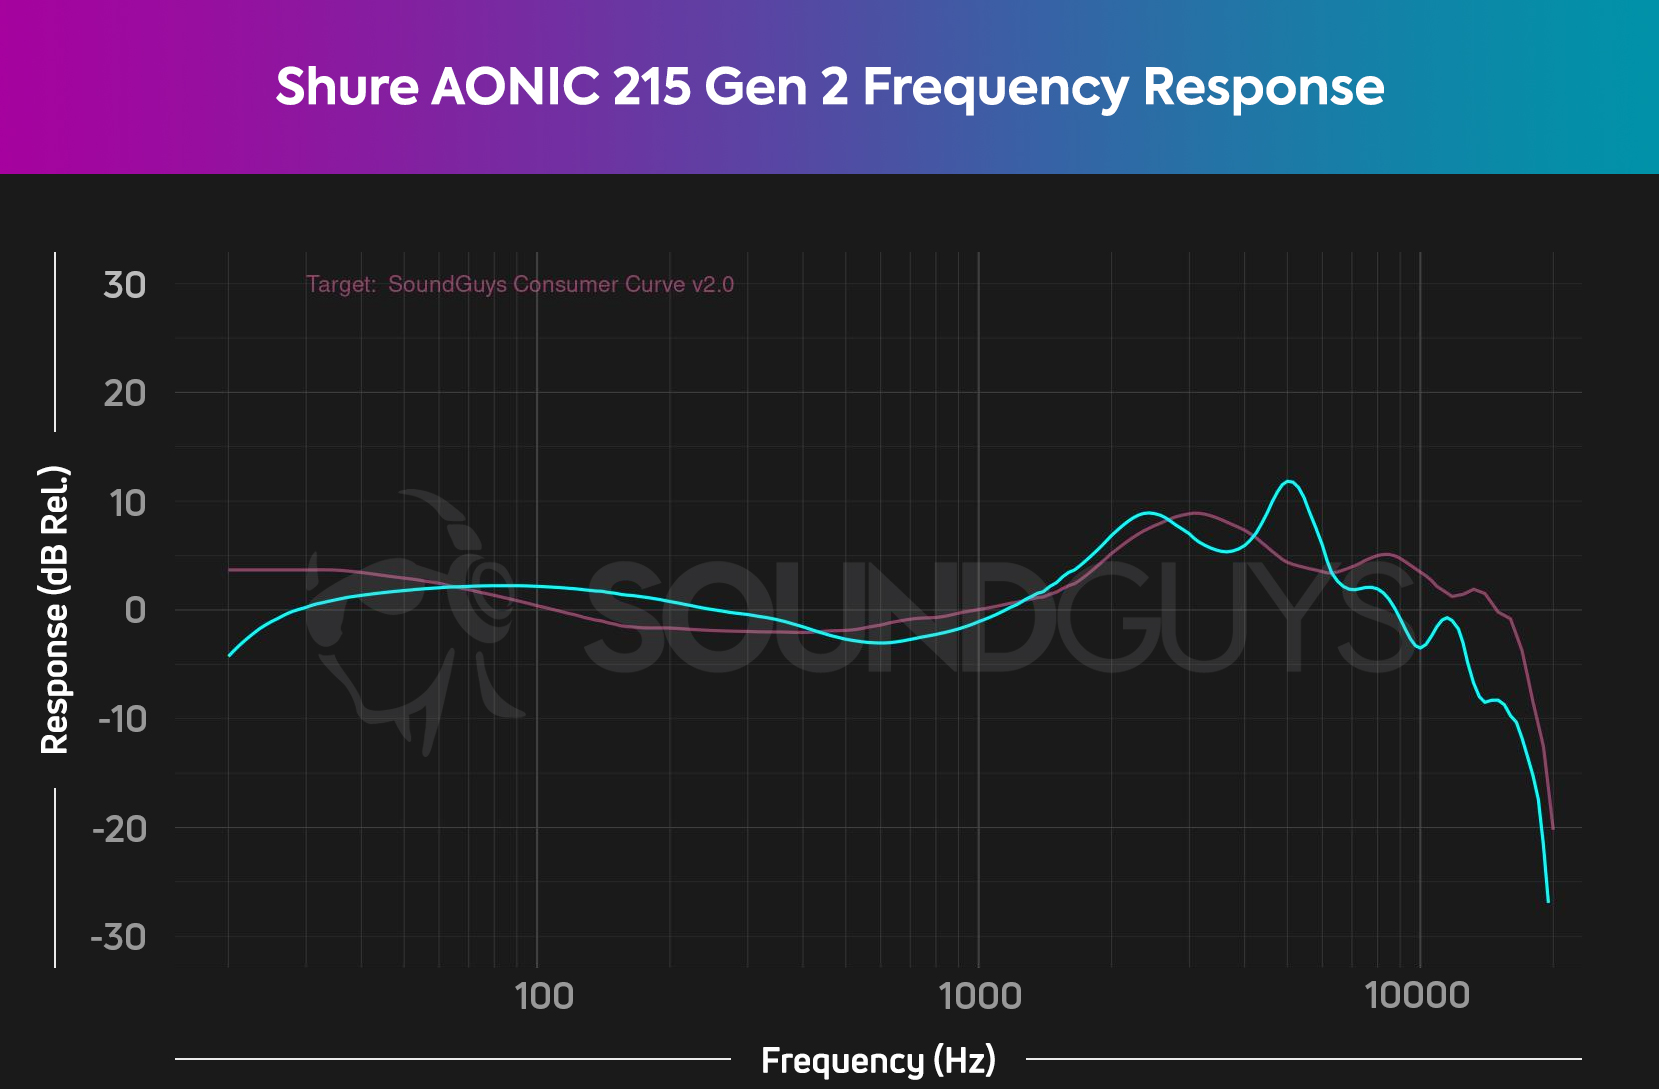 The Shure AONIC 215 Gen 2 frequency response as measured against the house curve.